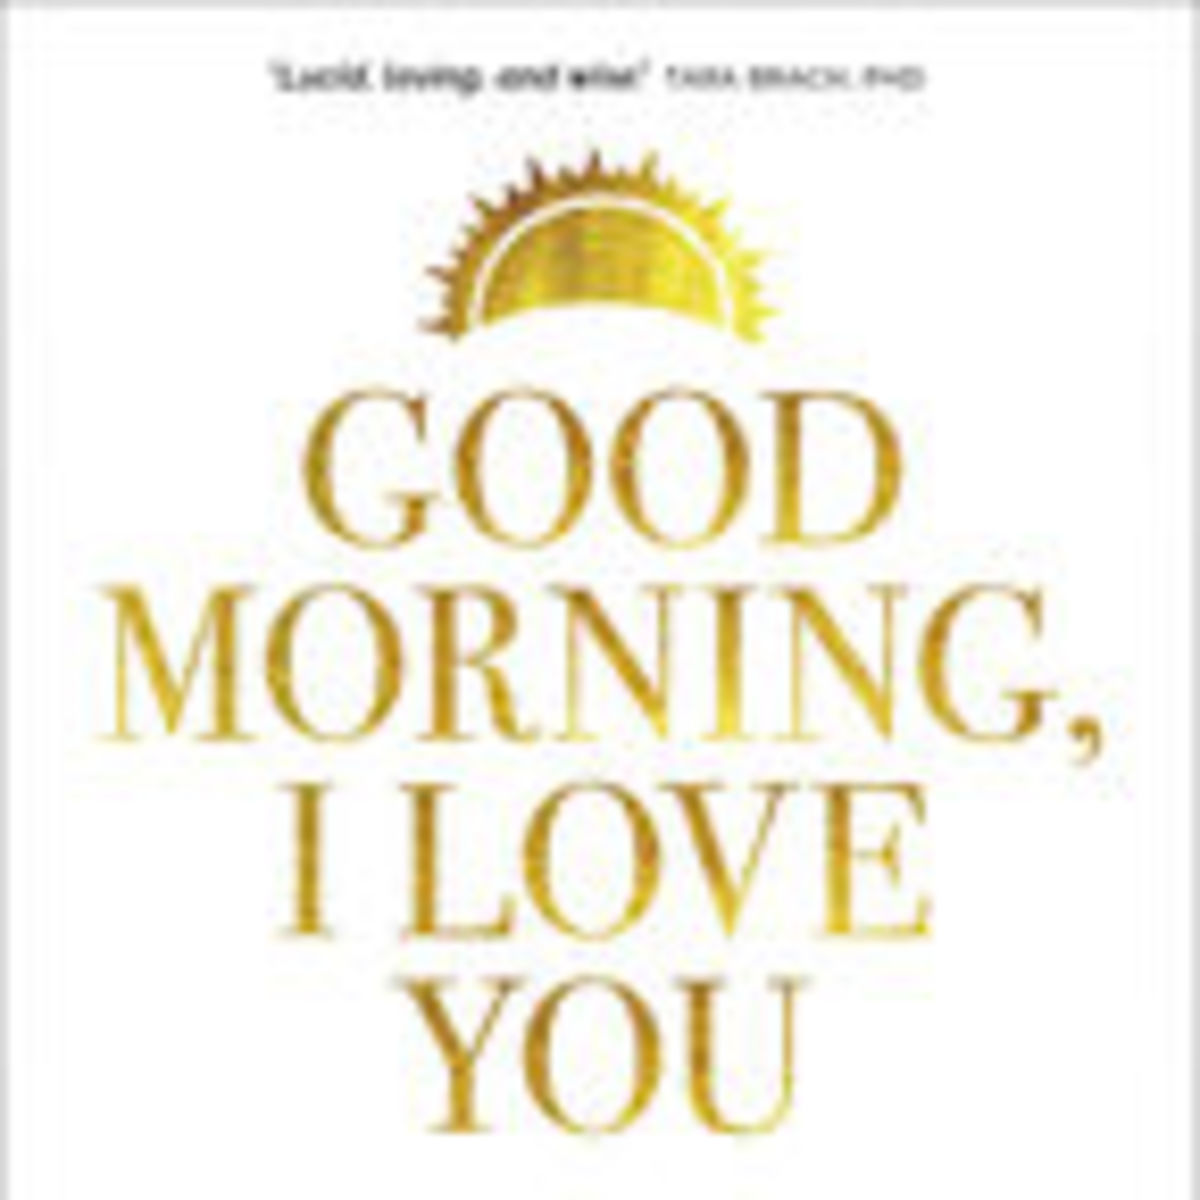 Good Morning I Love You Author Speaks On Self Compassion Psychology Today New Zealand